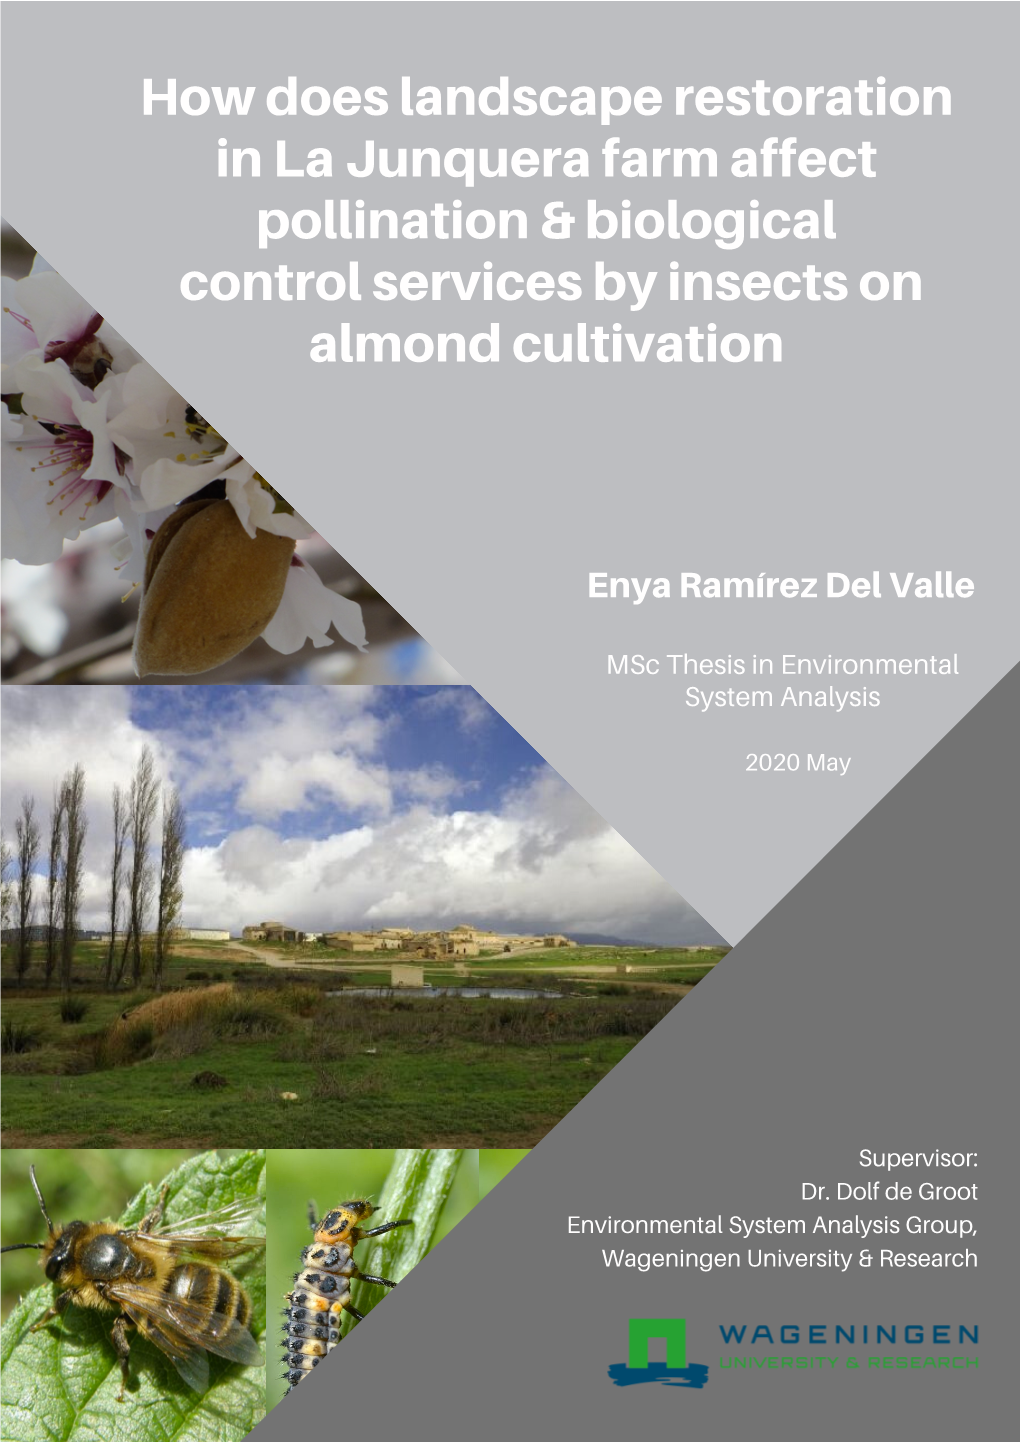 How Does Landscape Restoration in La Junquera Farm Affect Pollination & Biological Control Services by Insects on Almond Cultivation